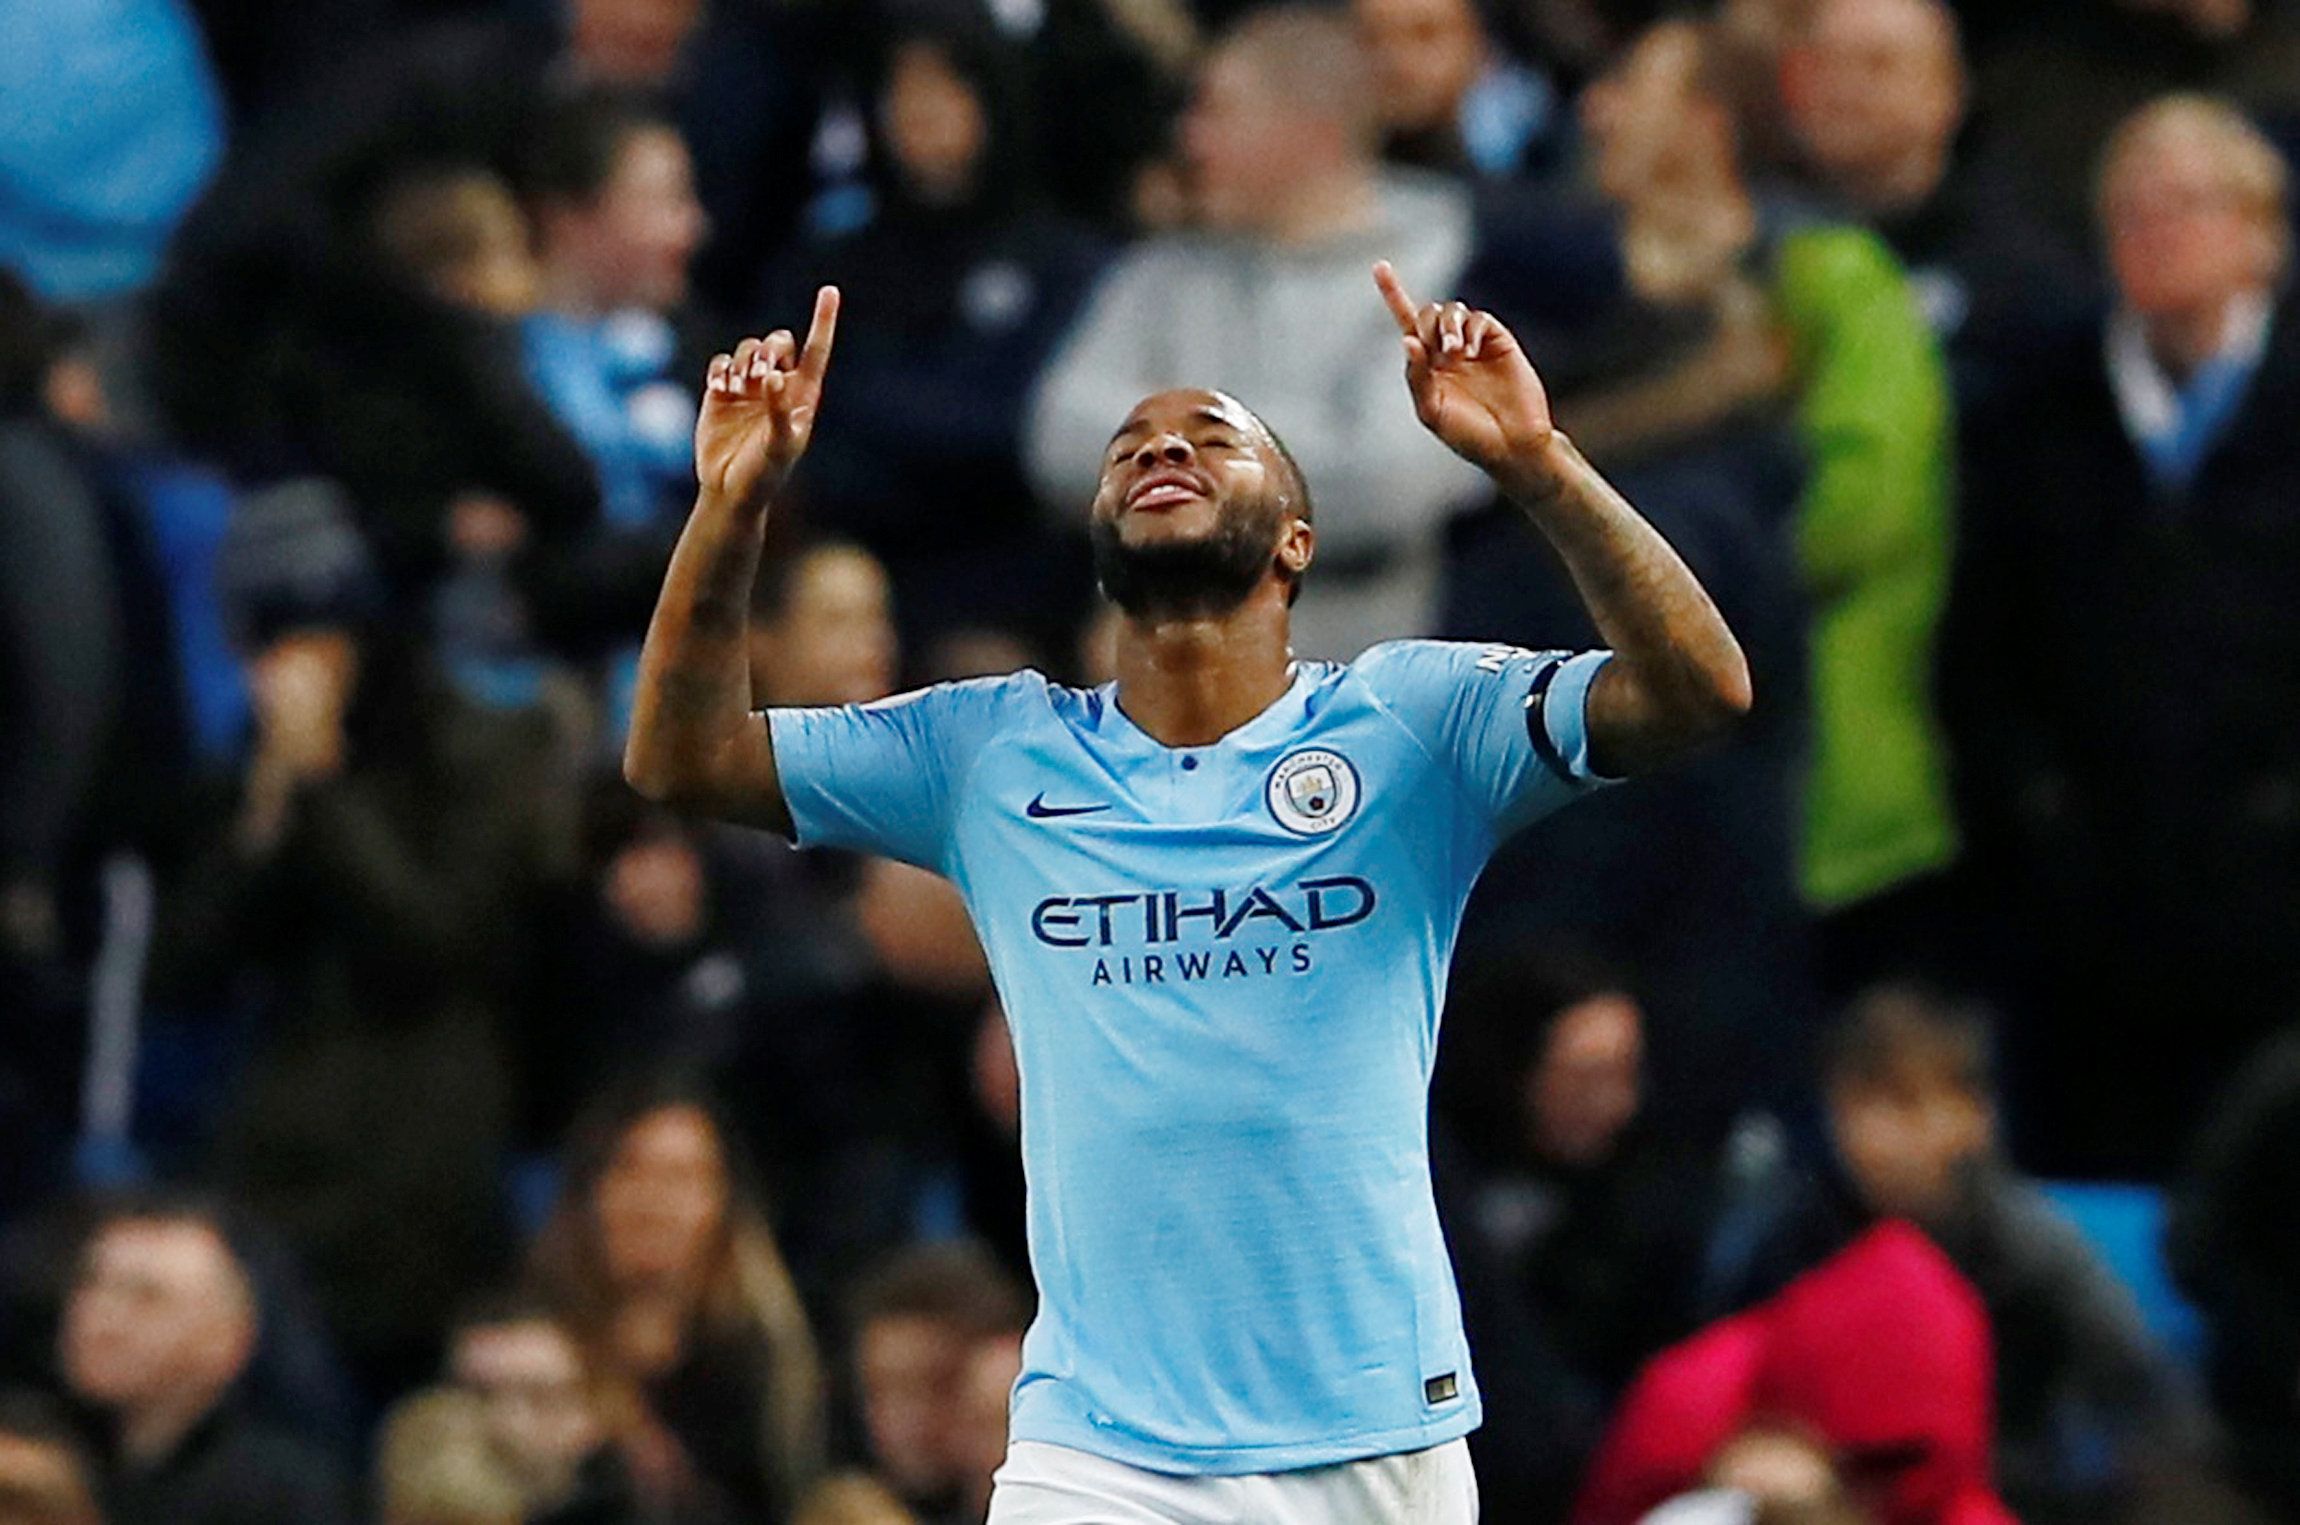 Soccer Football - Premier League - Manchester City v Southampton - Etihad Stadium, Manchester, Britain - November 4, 2018  Manchester City's Raheem Sterling celebrates scoring their fifth goal   Action Images via Reuters/Jason Cairnduff  EDITORIAL USE ONLY. No use with unauthorized audio, video, data, fixture lists, club/league logos or 